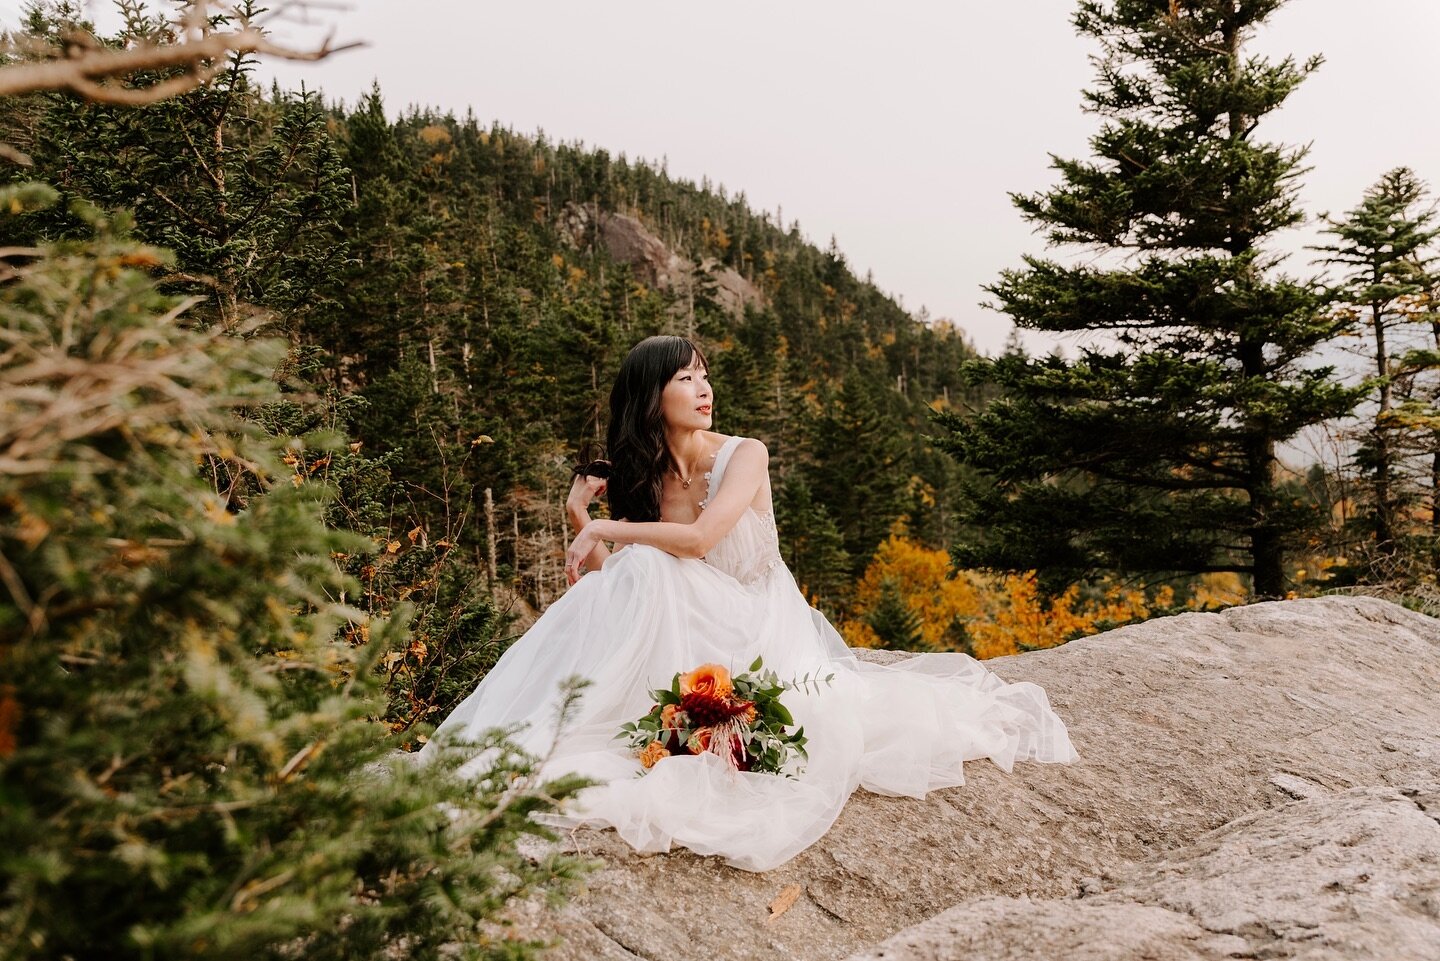 The 2023 wedding season has come to a close and I cannot begin to express my gratitude for how amazing of year it was. Looking back on one of my favorite days from the fall with this beautiful bride. Hope you all have a happy 2024 ❤️⁣
.⁣
.⁣
.⁣
.⁣
.⁣
